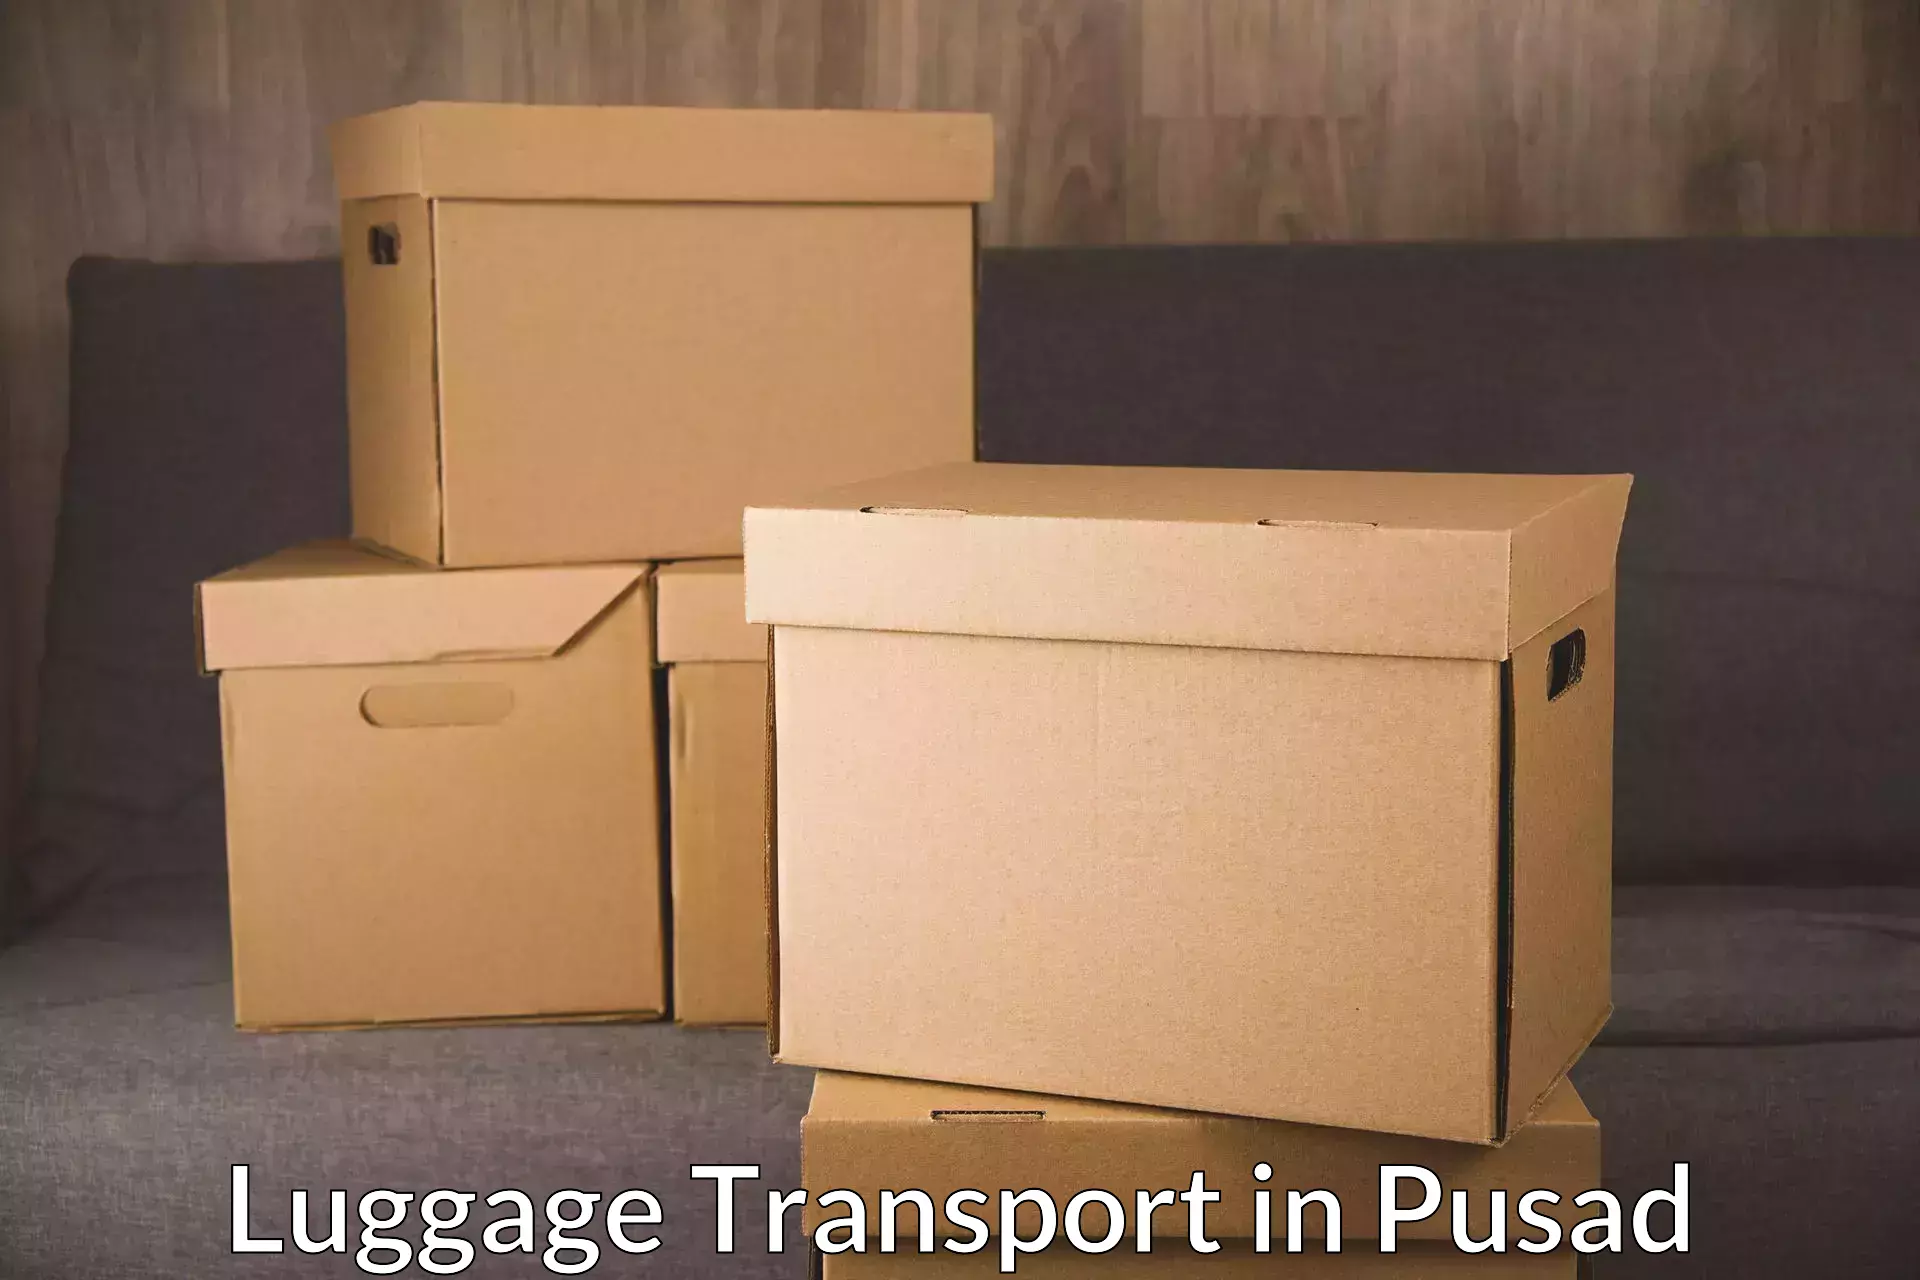 Luggage transport schedule in Pusad